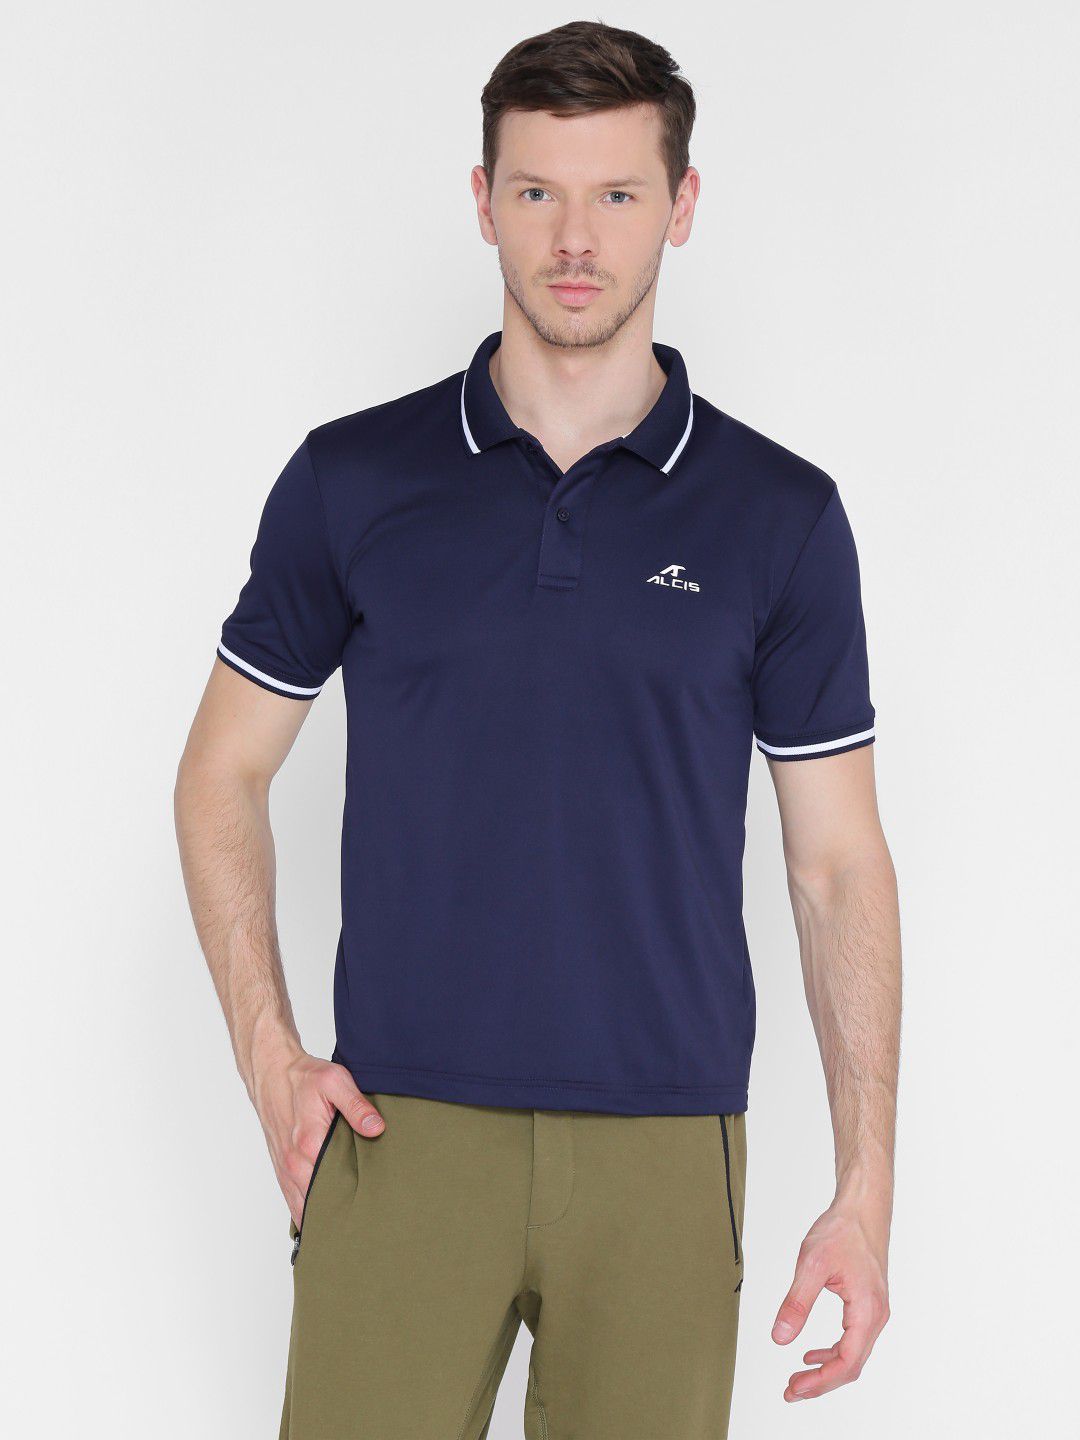 Alcis Mens Solid Navy Blue Polo T-Shirt